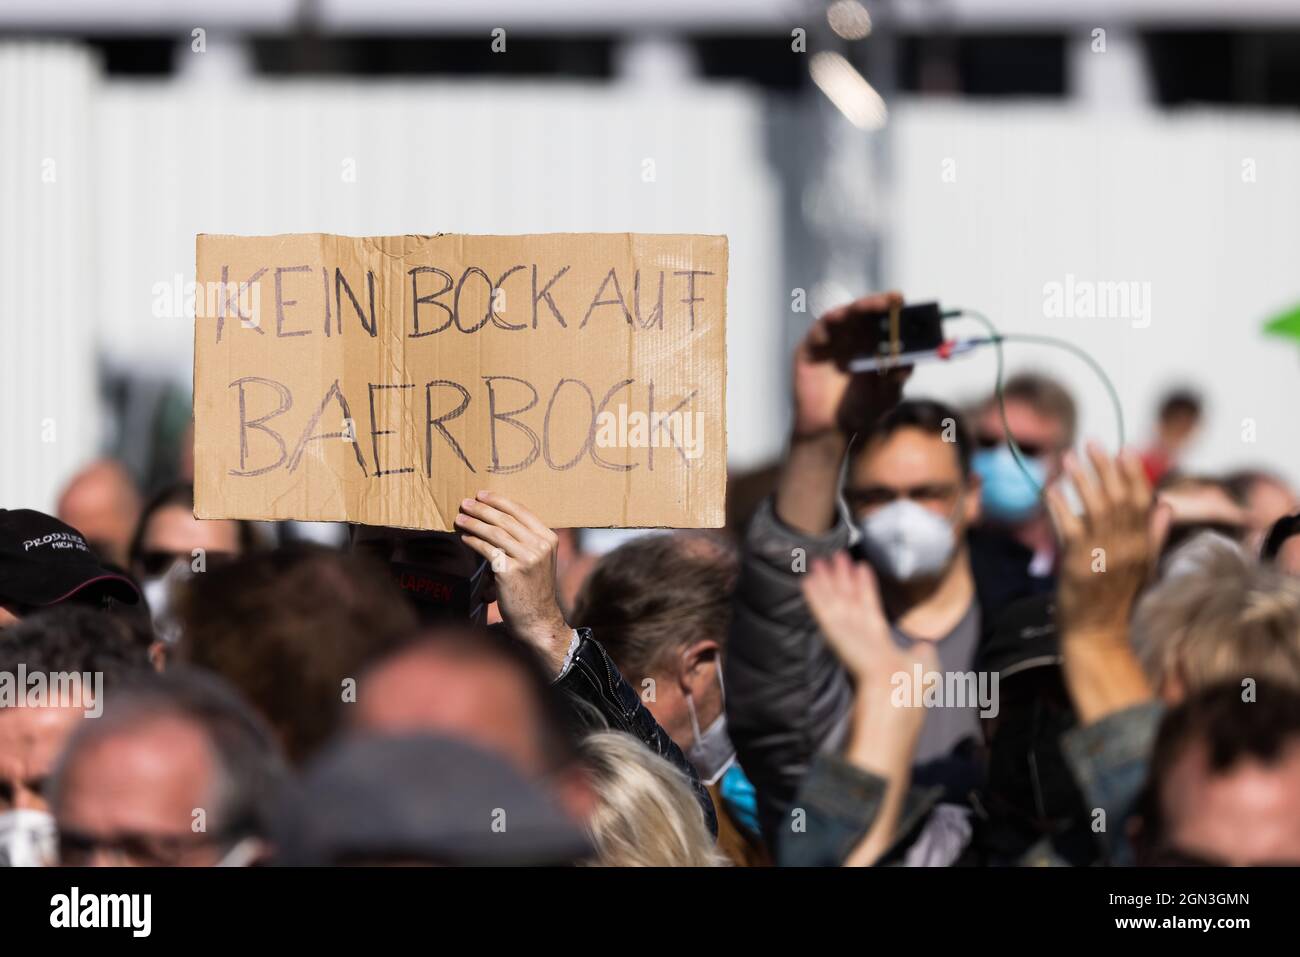 Karlsruhe, Germany. 22nd Sep, 2021. A man holds up a cardboard sign reading 'Kein Bock auf Baerbock' ('No Bock for Baerbock') at an election rally for Bündnis 90/Die Grünen. Credit: Philipp von Ditfurth/dpa/Alamy Live News Stock Photo